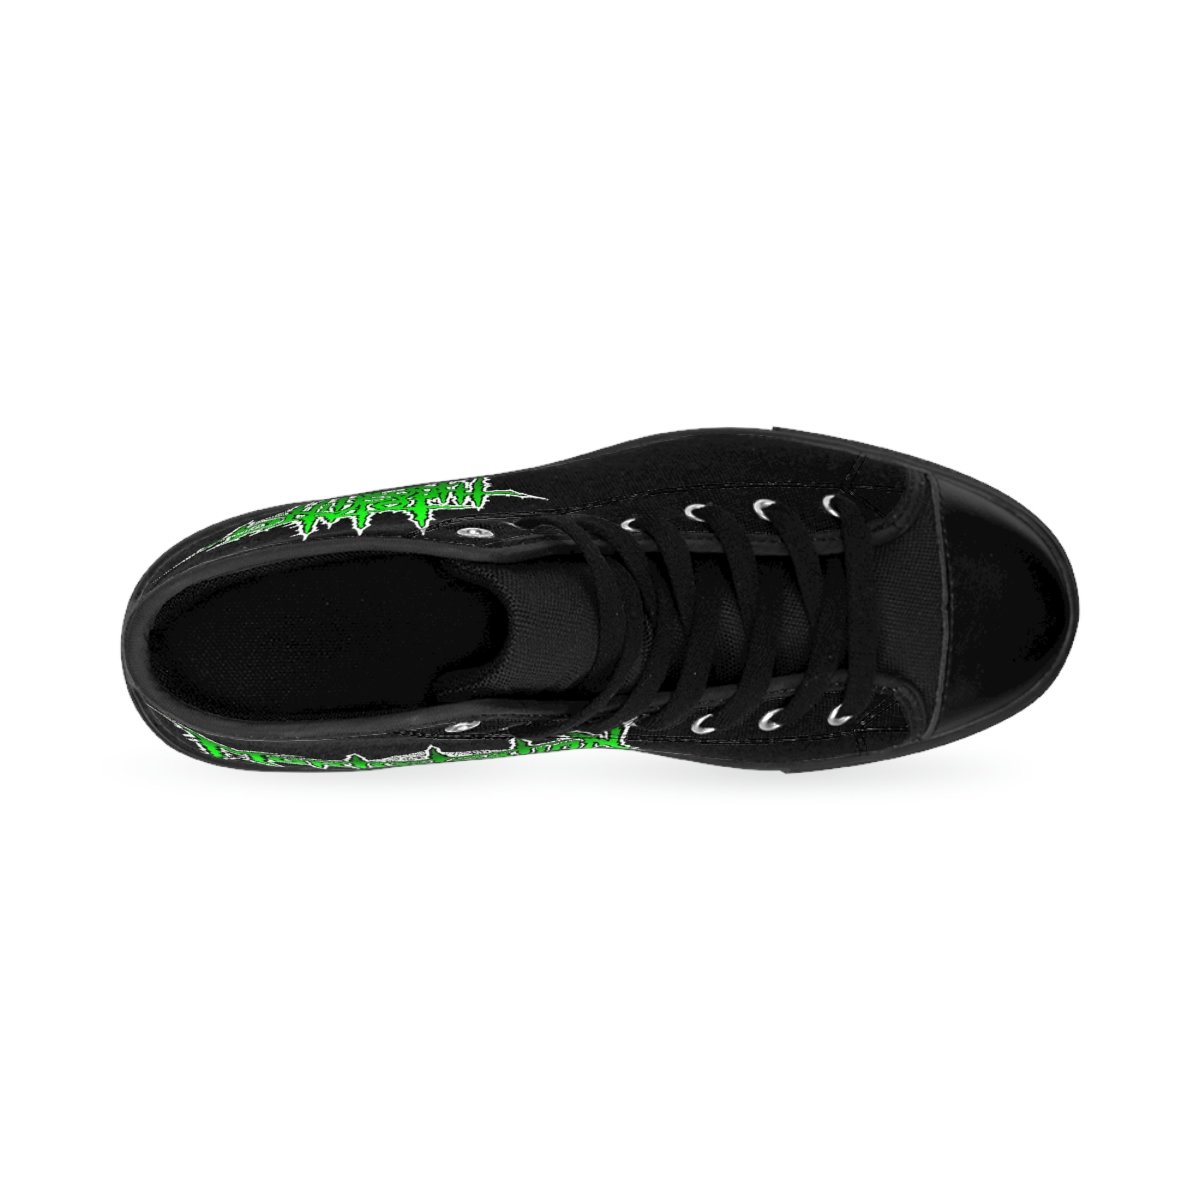 Mortification Total Thrashing Death (Green) Men’s High-top Sneakers